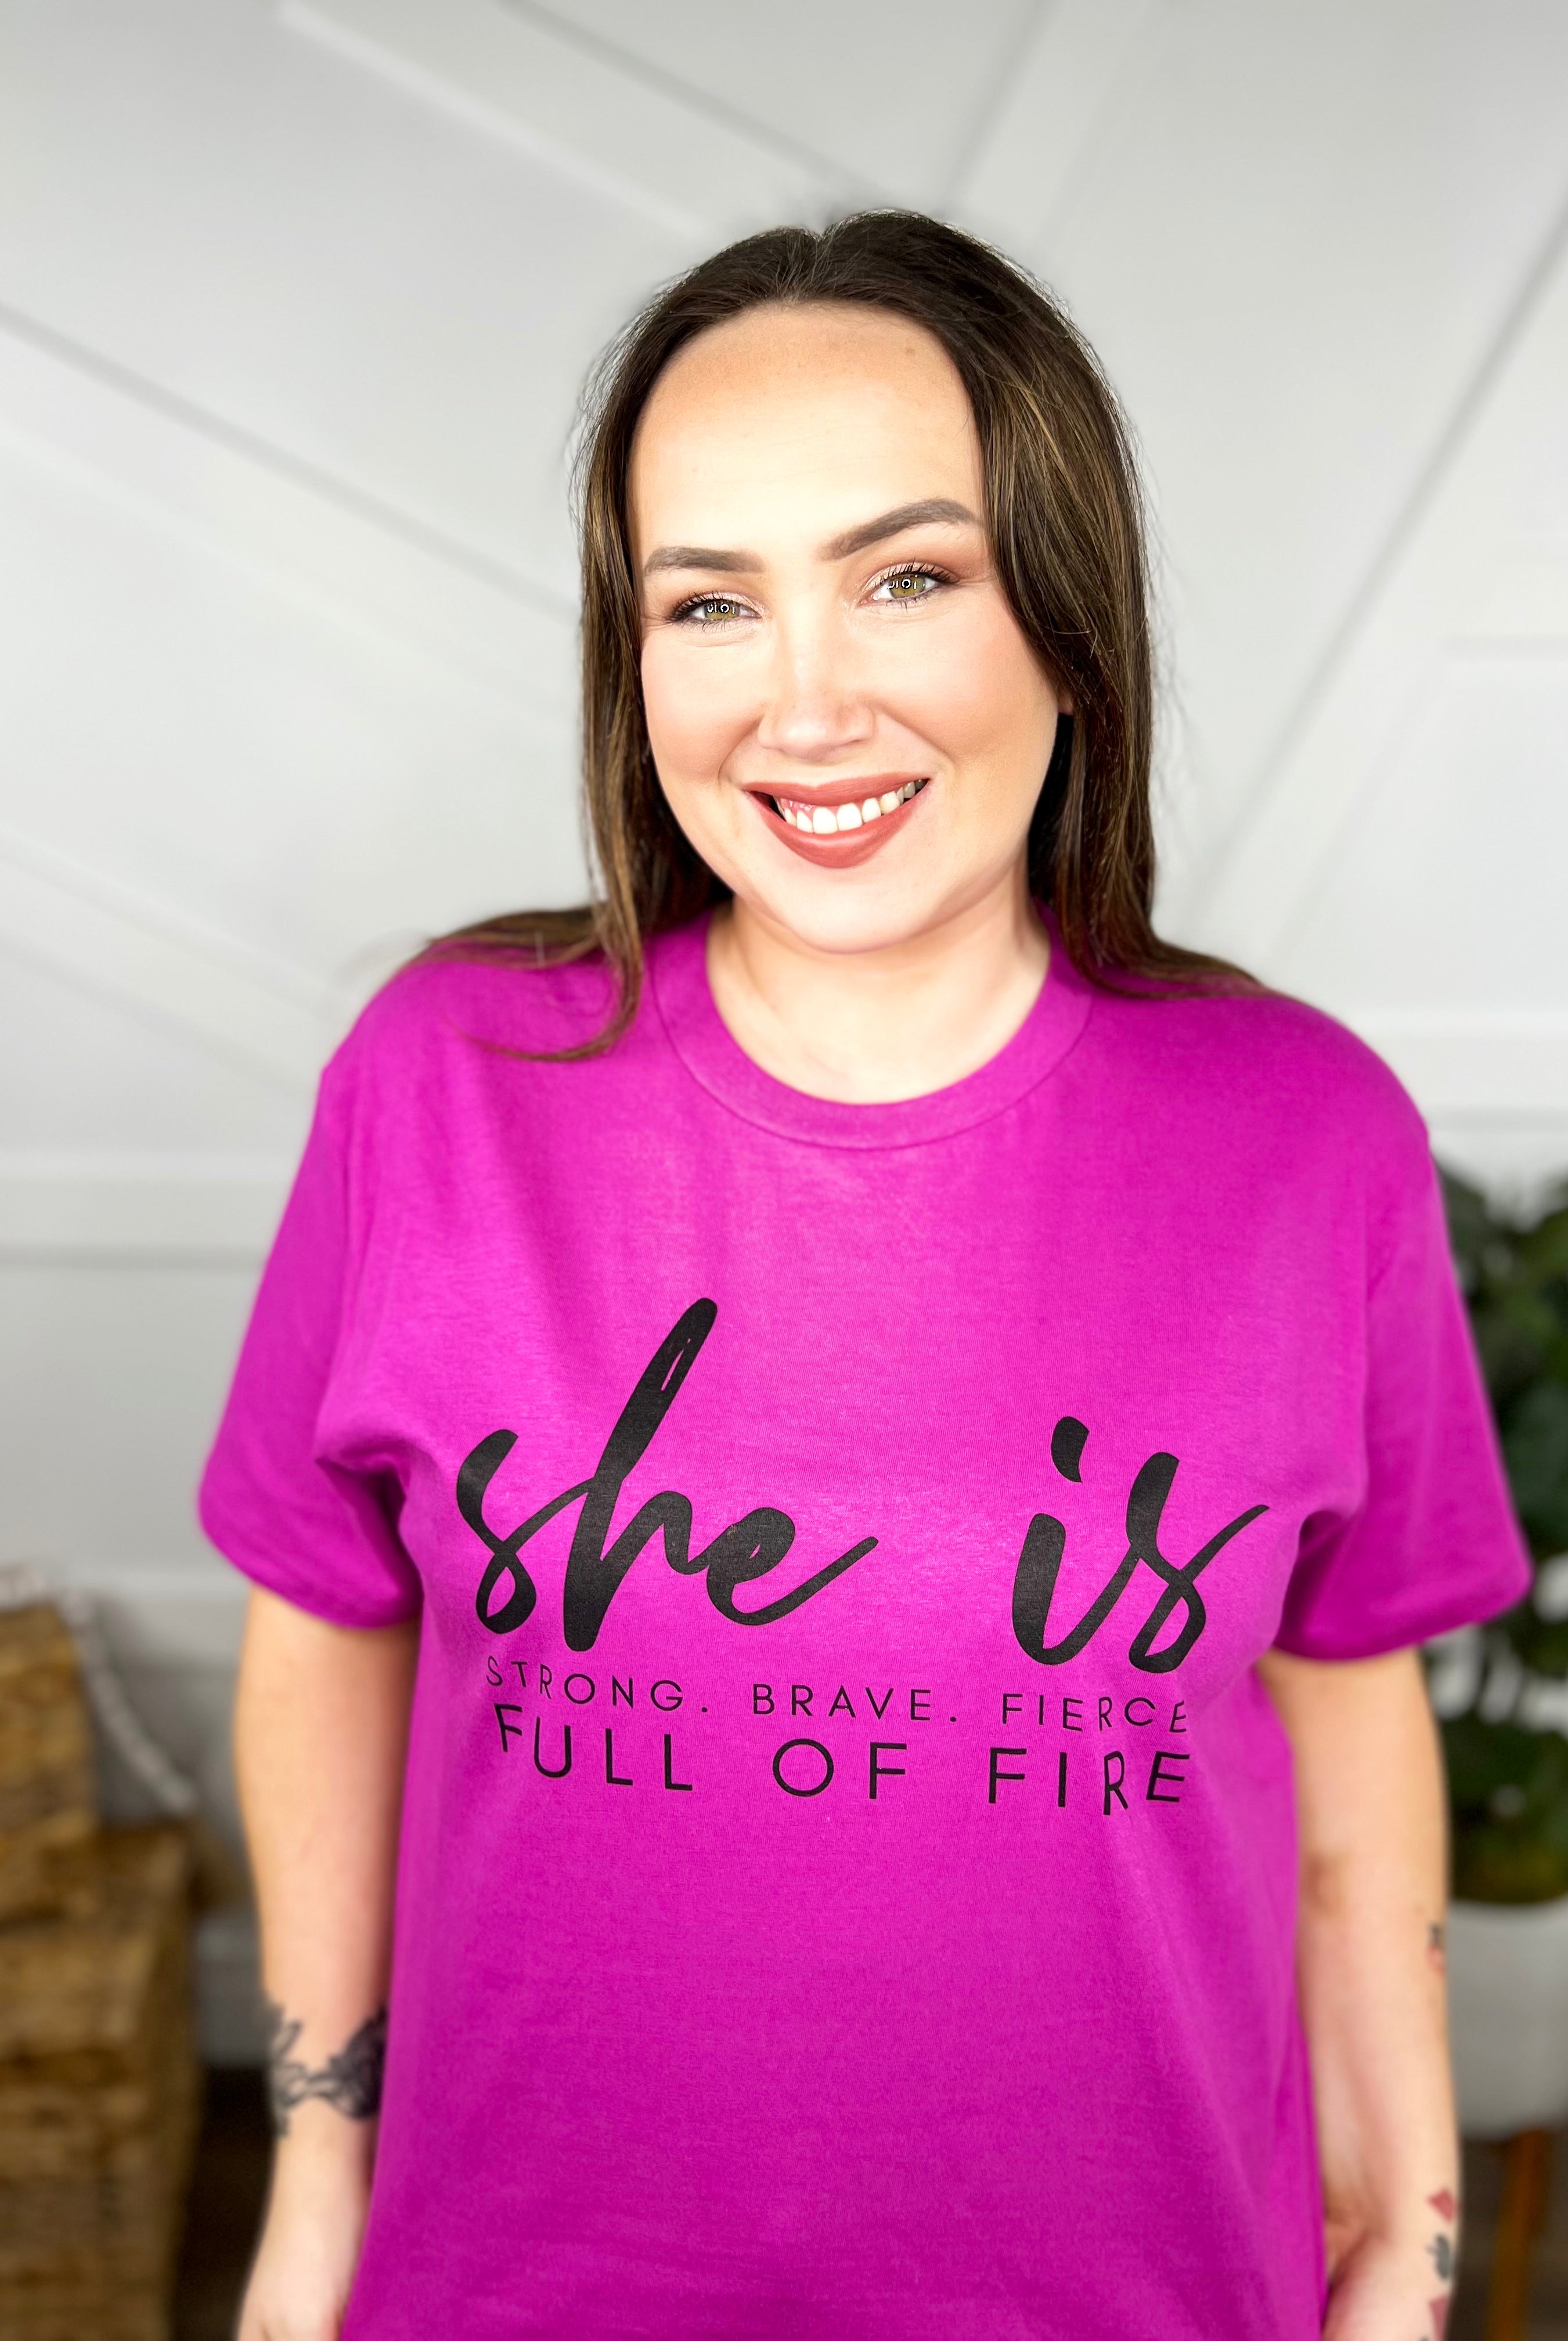 She Is Full of Fire Graphic Tee-110 Short Sleeve Top-Heathered Boho-Heathered Boho Boutique, Women's Fashion and Accessories in Palmetto, FL